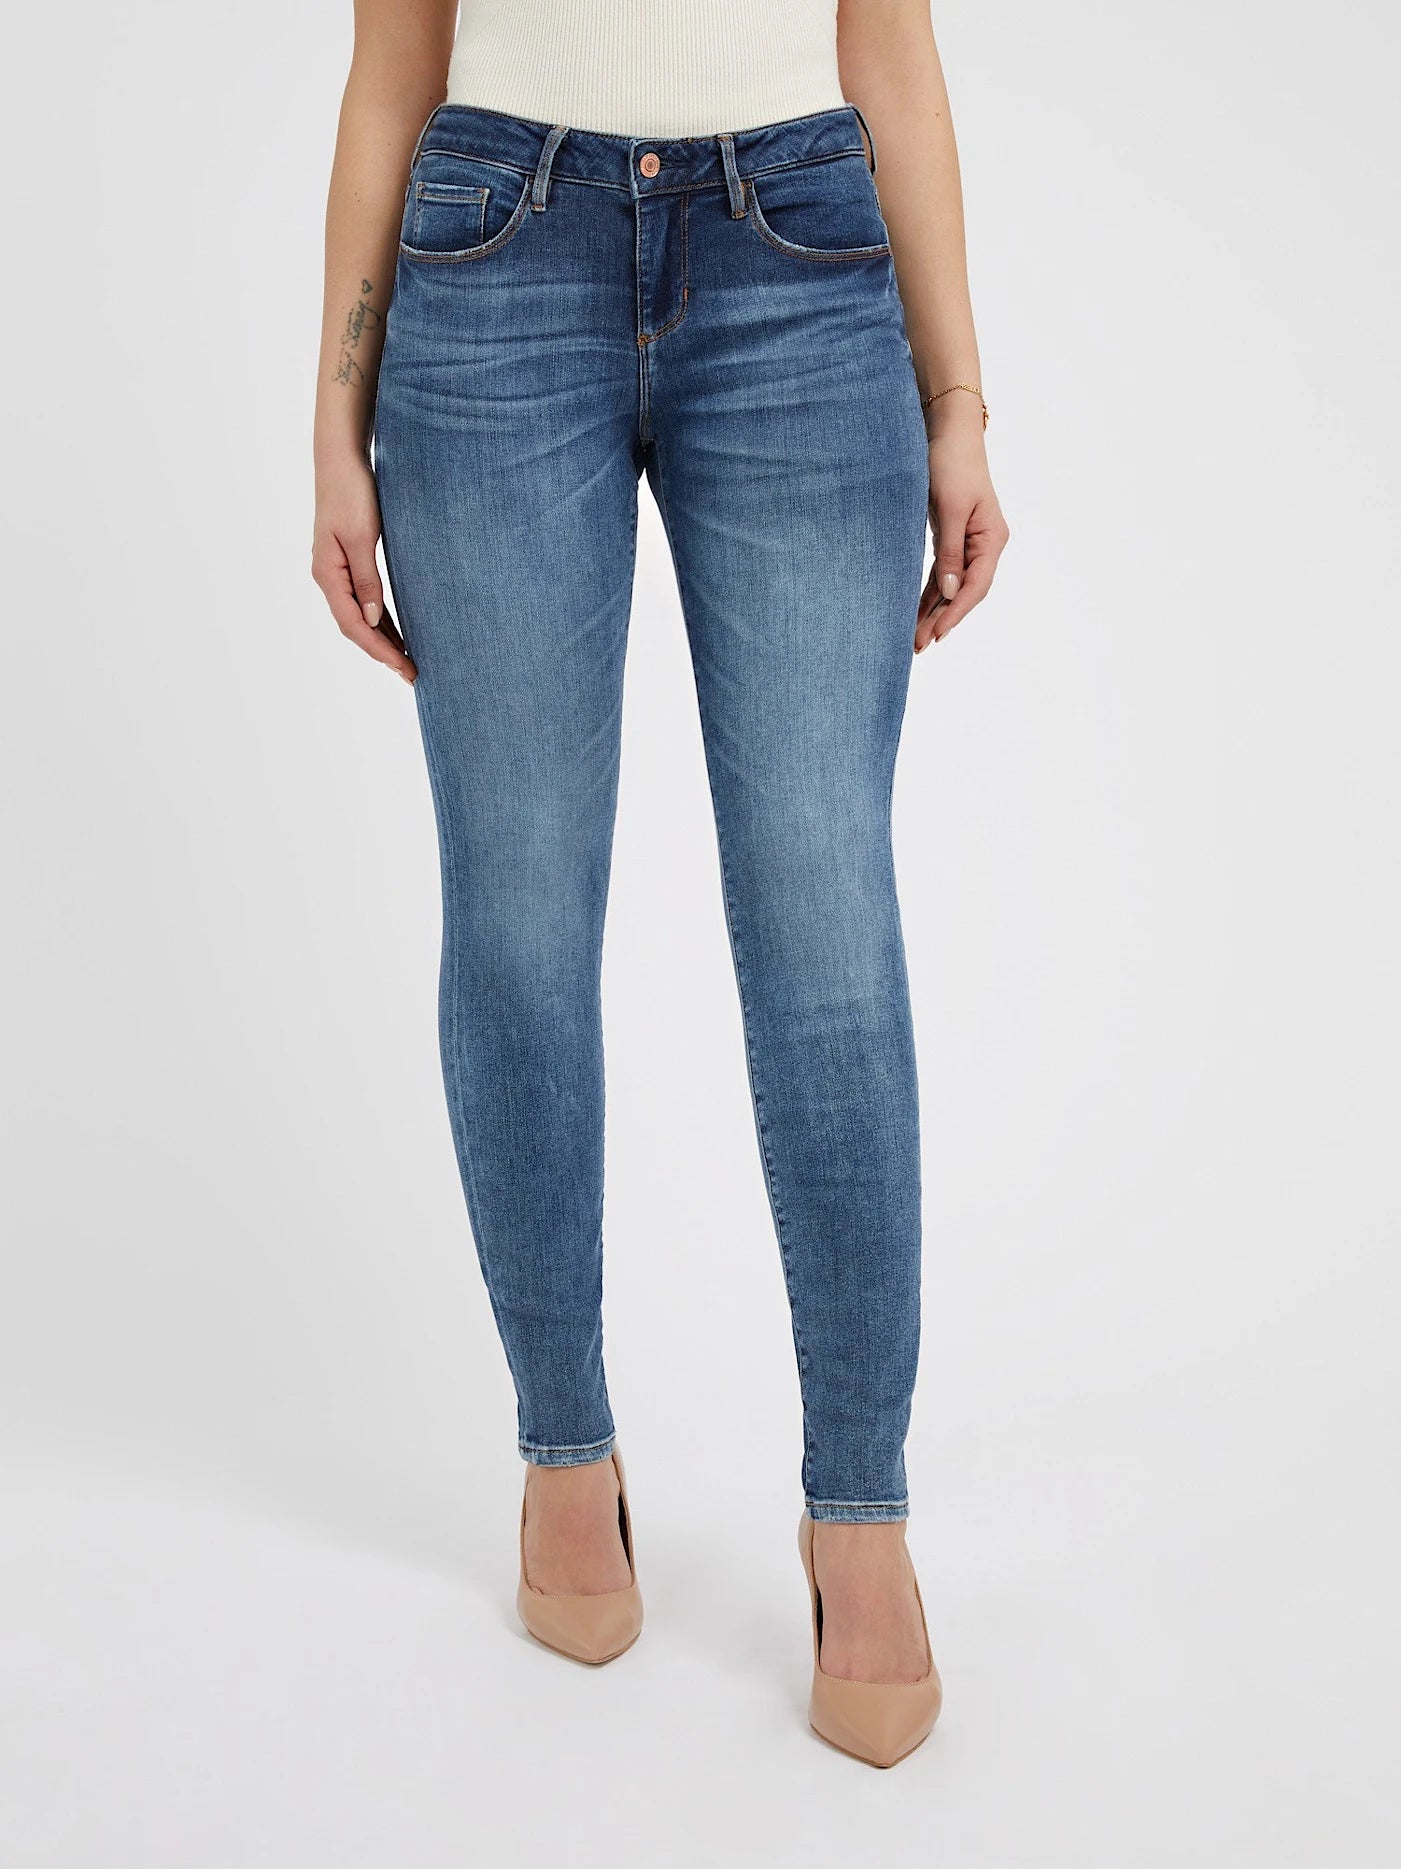 Guess Damen Skinny fit Jeans Anette